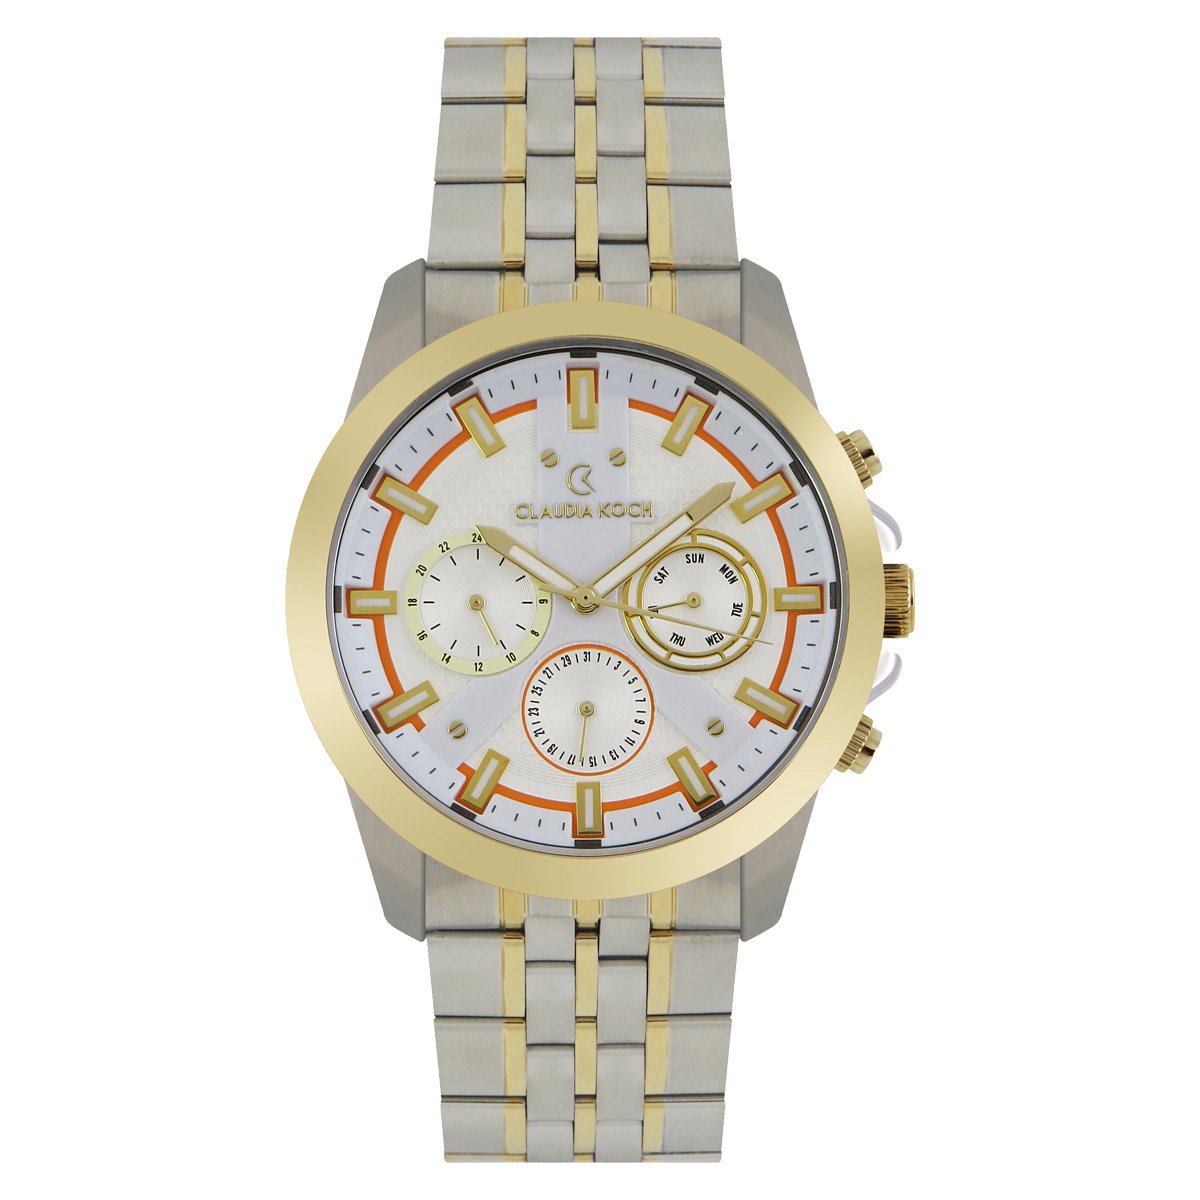 ClaudiaKoch CK 4313 Two-Tone Gold Analog Chrono Stainless Steel